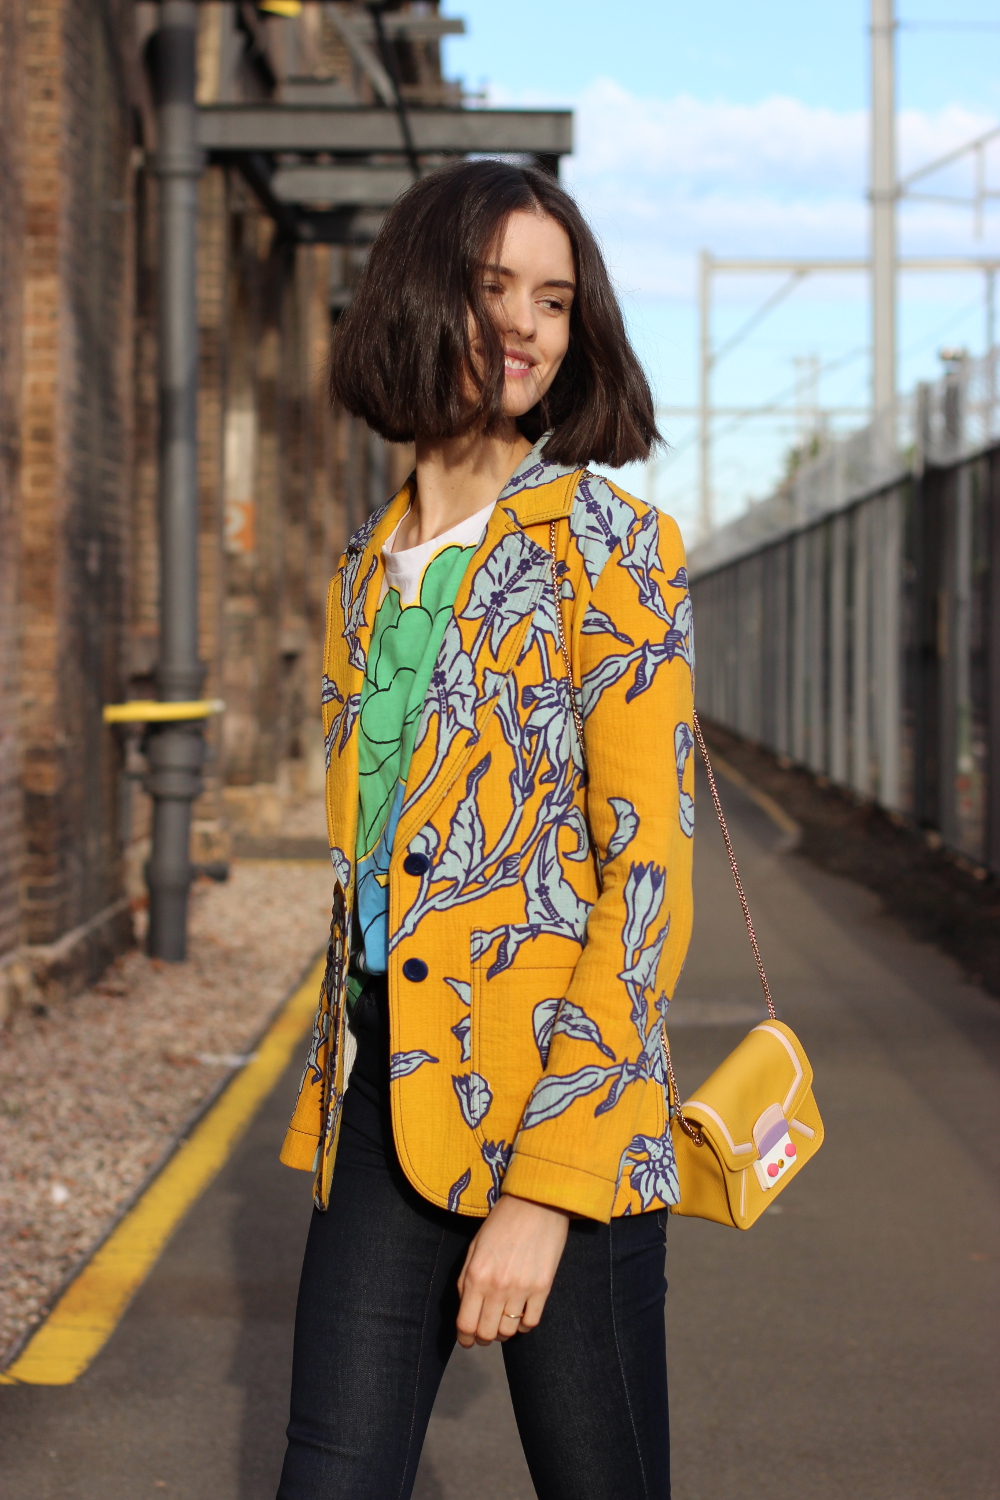 BY CHILL FASHION | Karen Walker floral print Thrive blazer in mustard, Marni flower tshirt, furla yellow shoulder bag and citizens of humanity curve flare jeans